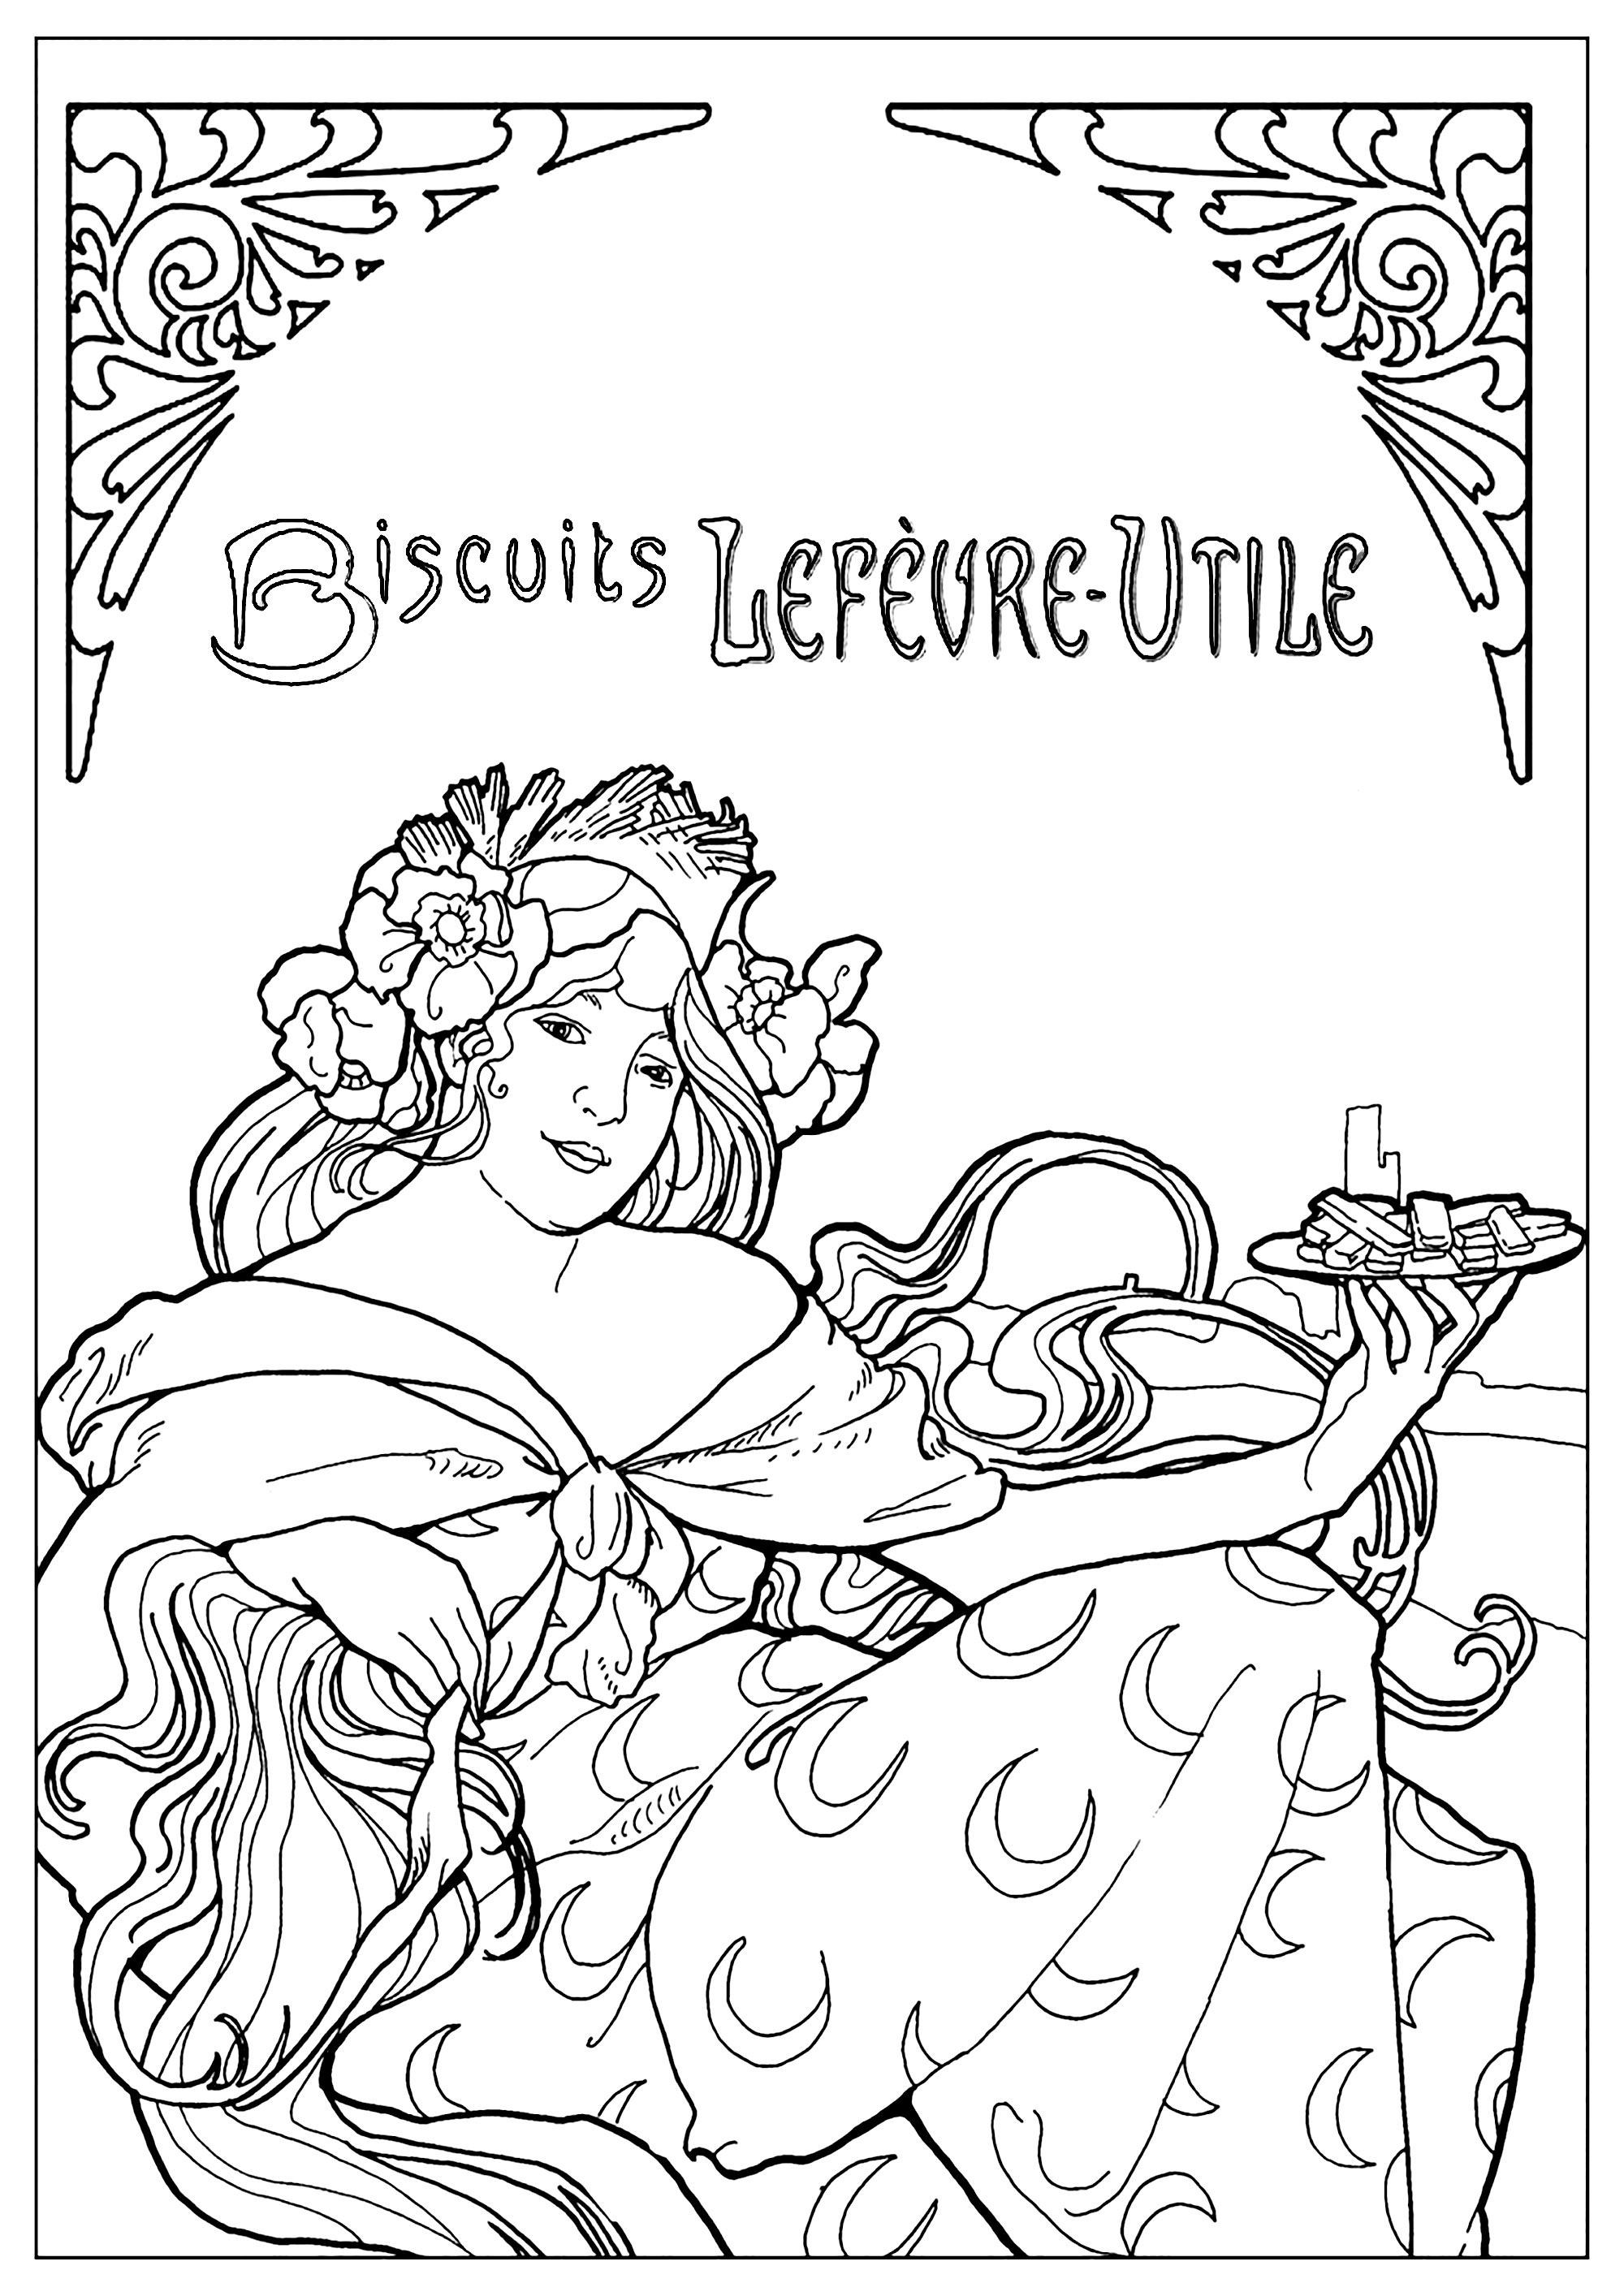 Coloring page created from a french advertising poster for Biscuits Lefèvre-Utile (LU) by Alfons Mucha (1896).This poster is typical of the Art Nouveau style. An original copy of this poster is visible at the Carnavalet Museum (Paris History Museum, in Paris)